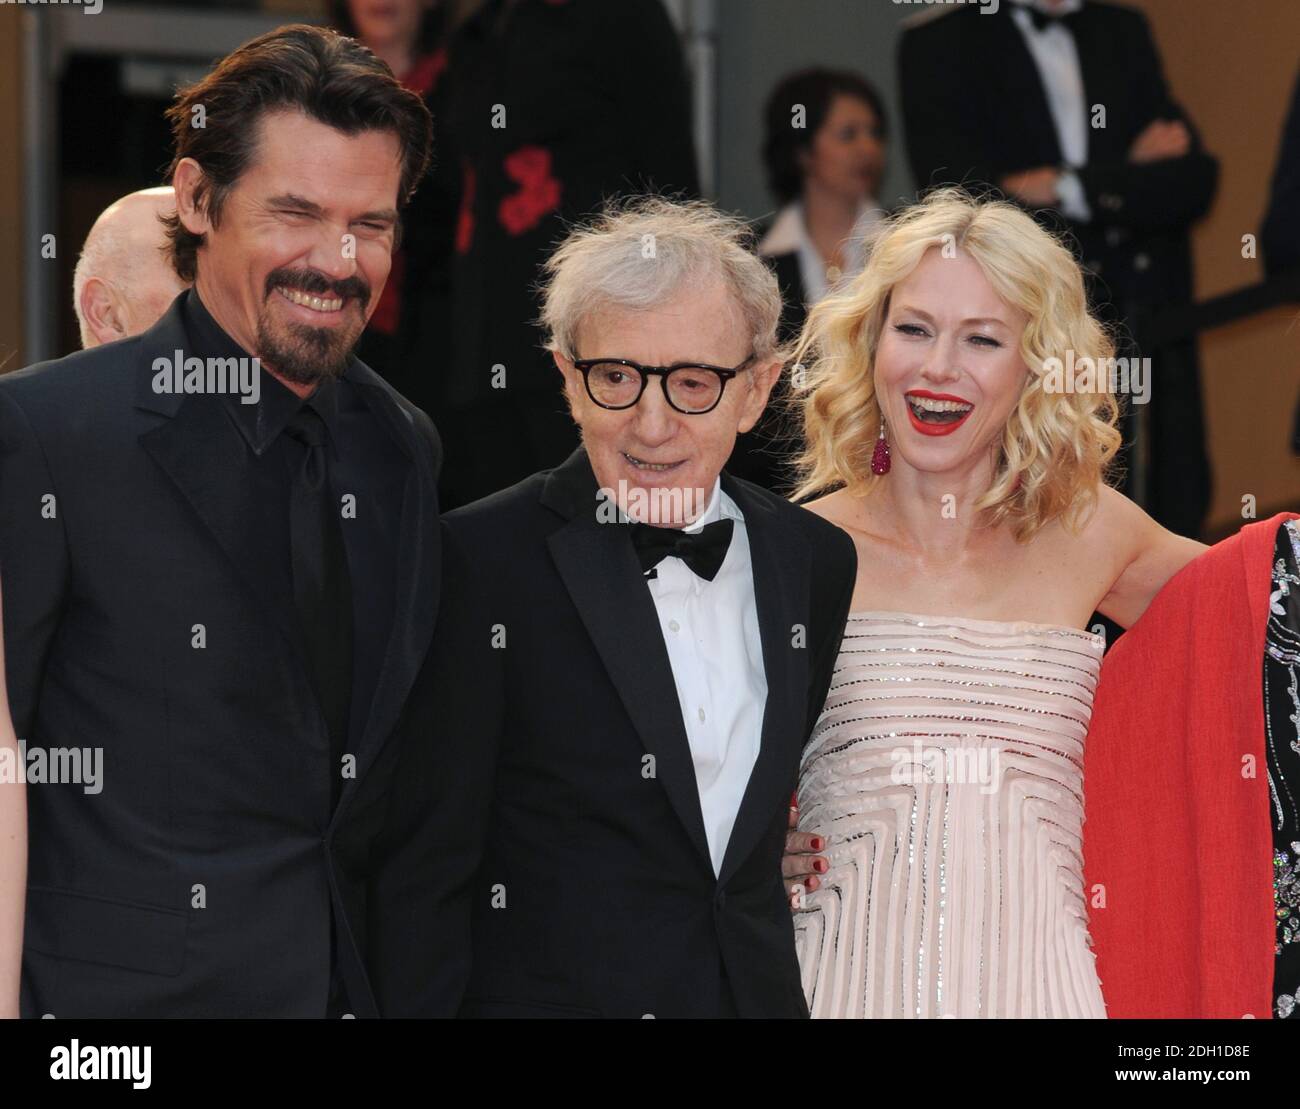 Josh Brolin, Woody Allen and Naomi Watts arrive at the premiere of You Will Meet A Tall Dark Stranger at the Grand Auditorium Lumiere, Palais des Festivals, Cannes. Part of the 63rd Cannes Film Festival  Stock Photo